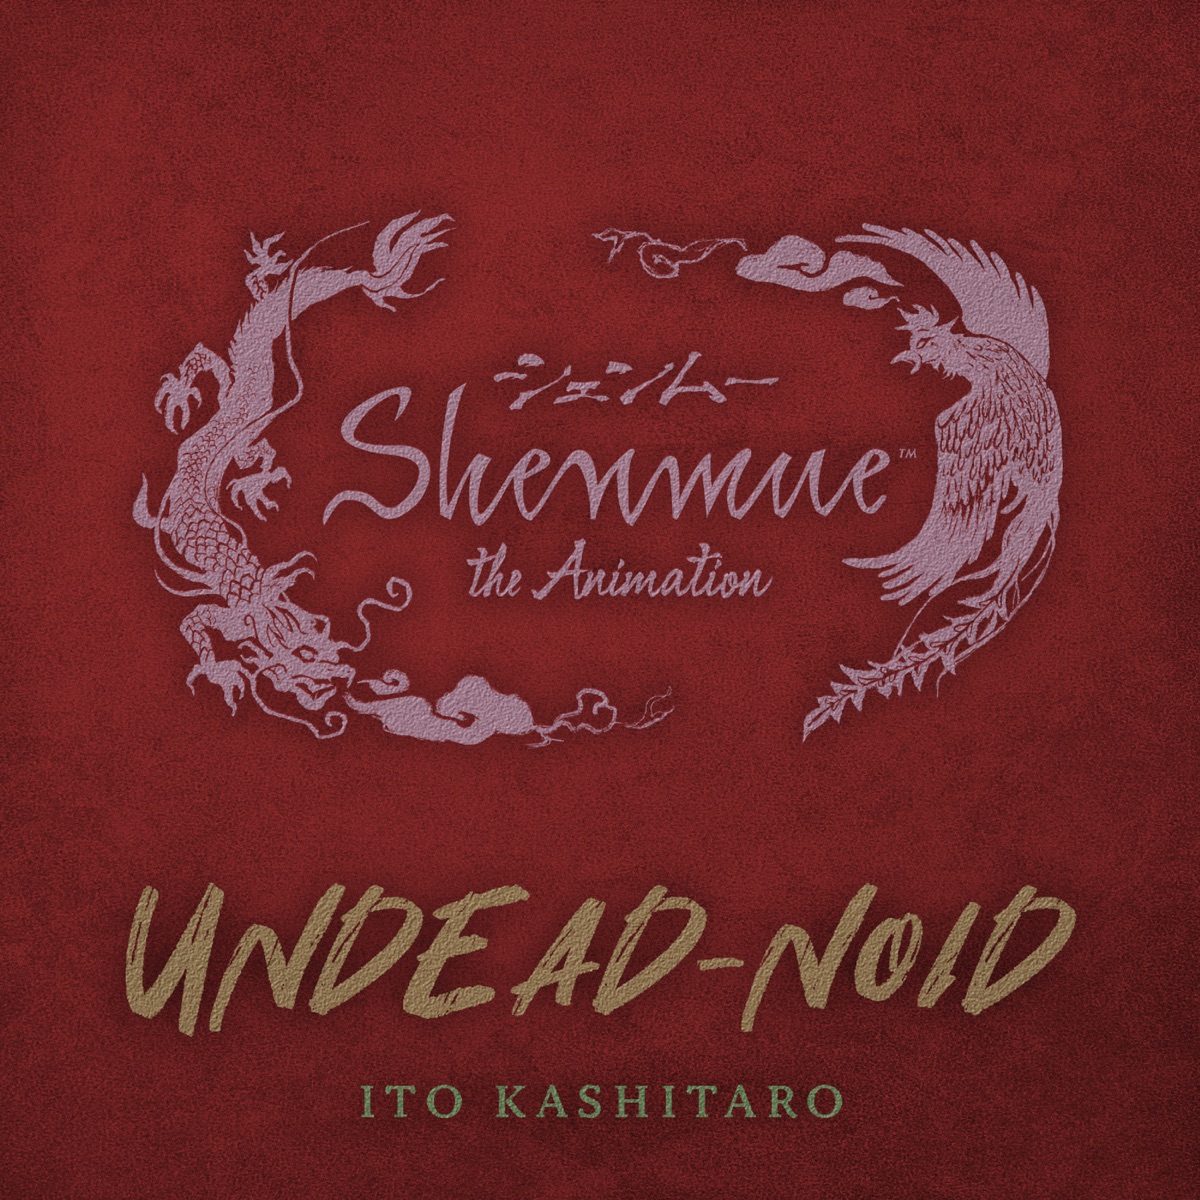 Cover art for『Kashitaro Ito - UNDEAD-NOID』from the release『UNDEAD-NOID』